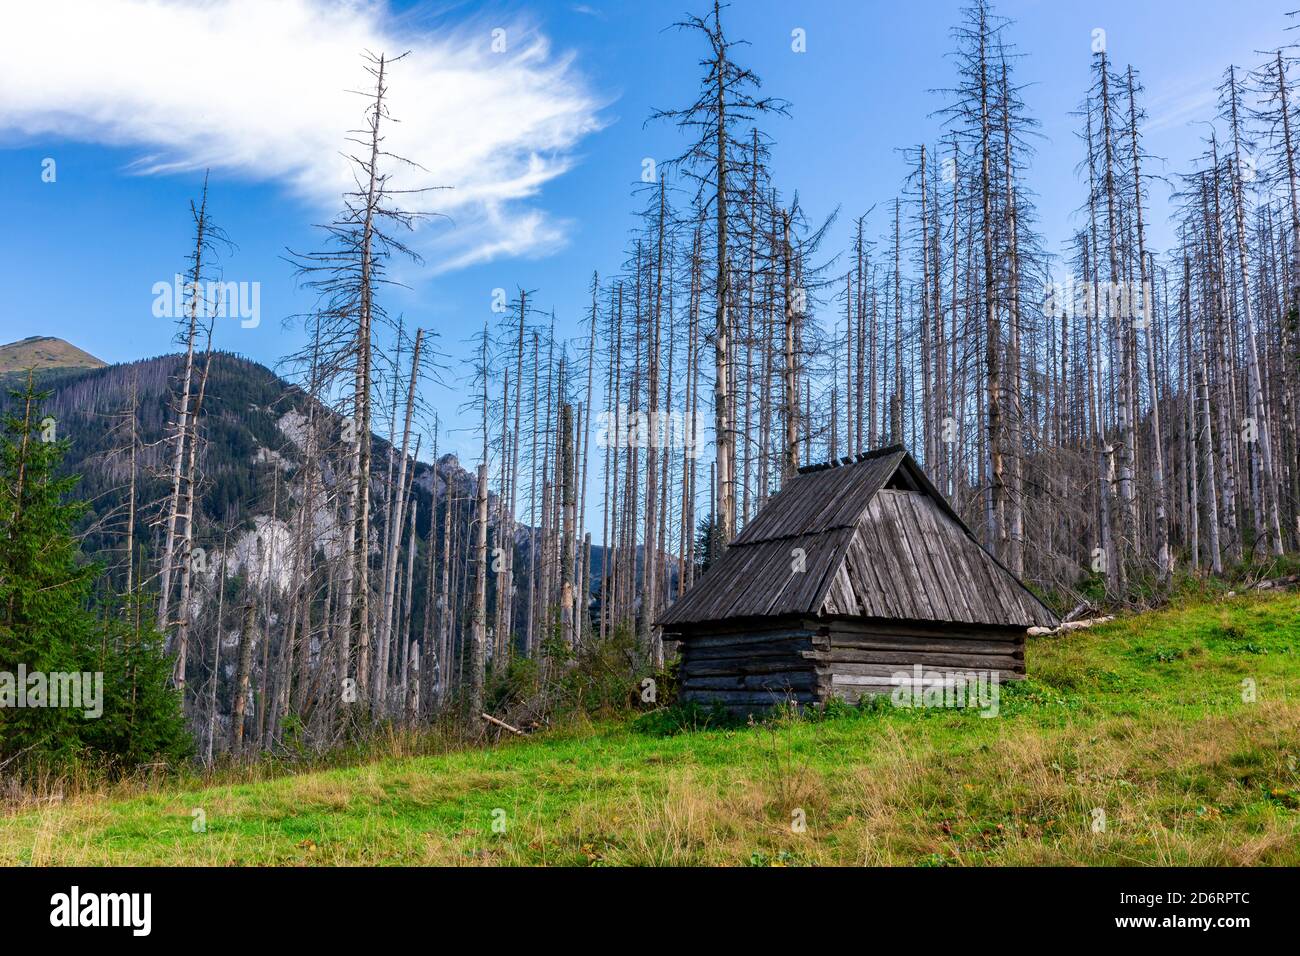 Old wooden shepherd's hut on a glade in Tatra Mountains, Poland, with dry dead pine trees and spruces in the background, summer, crystal blue sky. Stock Photo